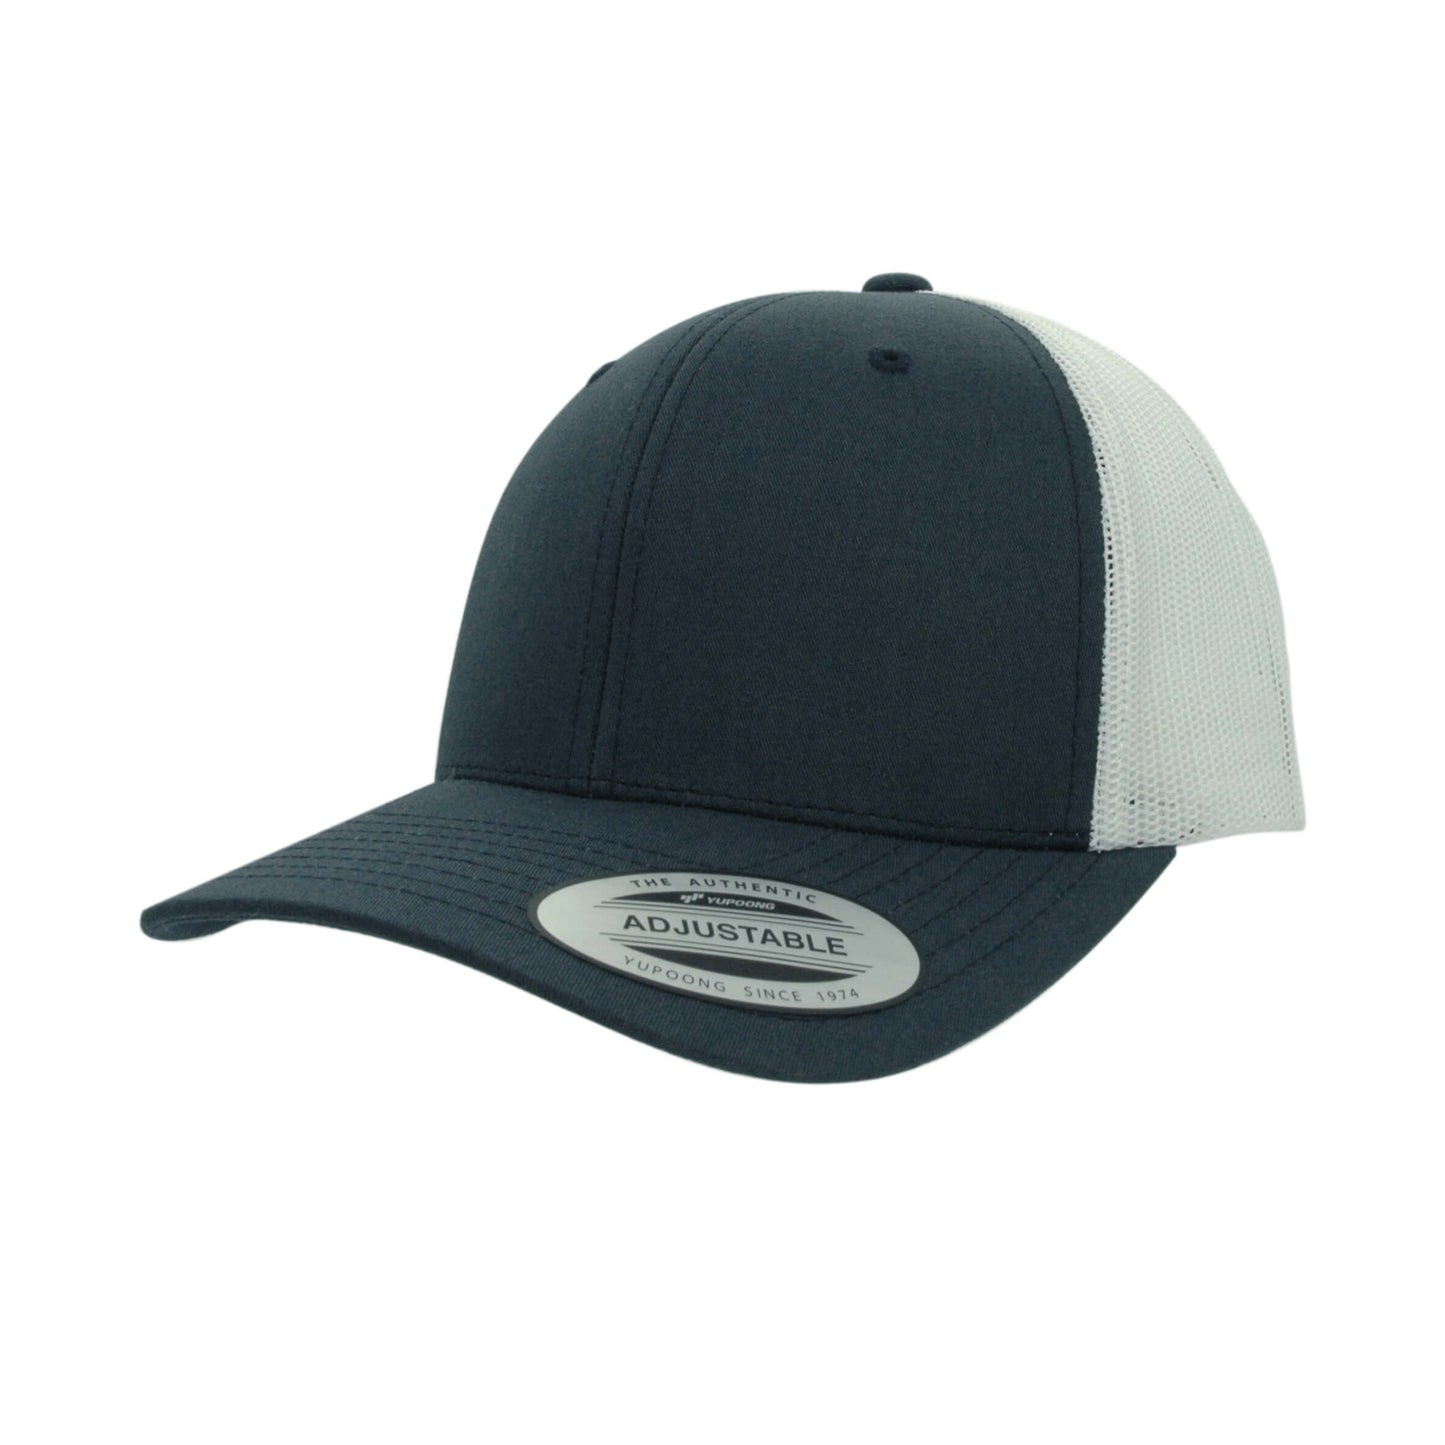 Two Tone  Navy and White Curved Peak Adjustable Mesh  Retro Trucker Cap